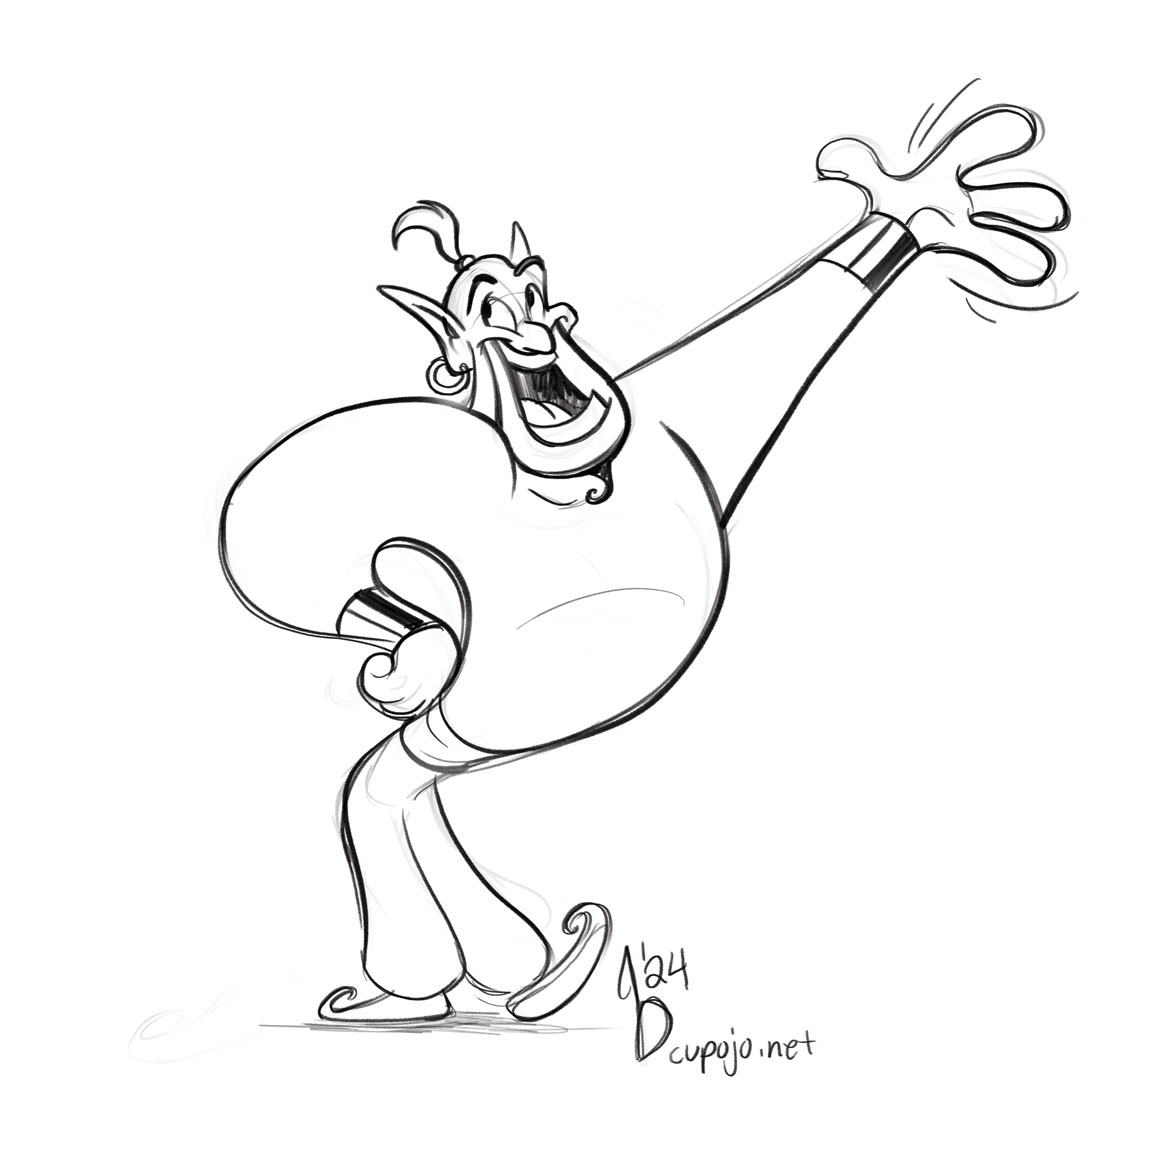 Bribe drawing for the evening: the Genie! My daughter really loves #Aladdin right now, in case you couldn't tell.